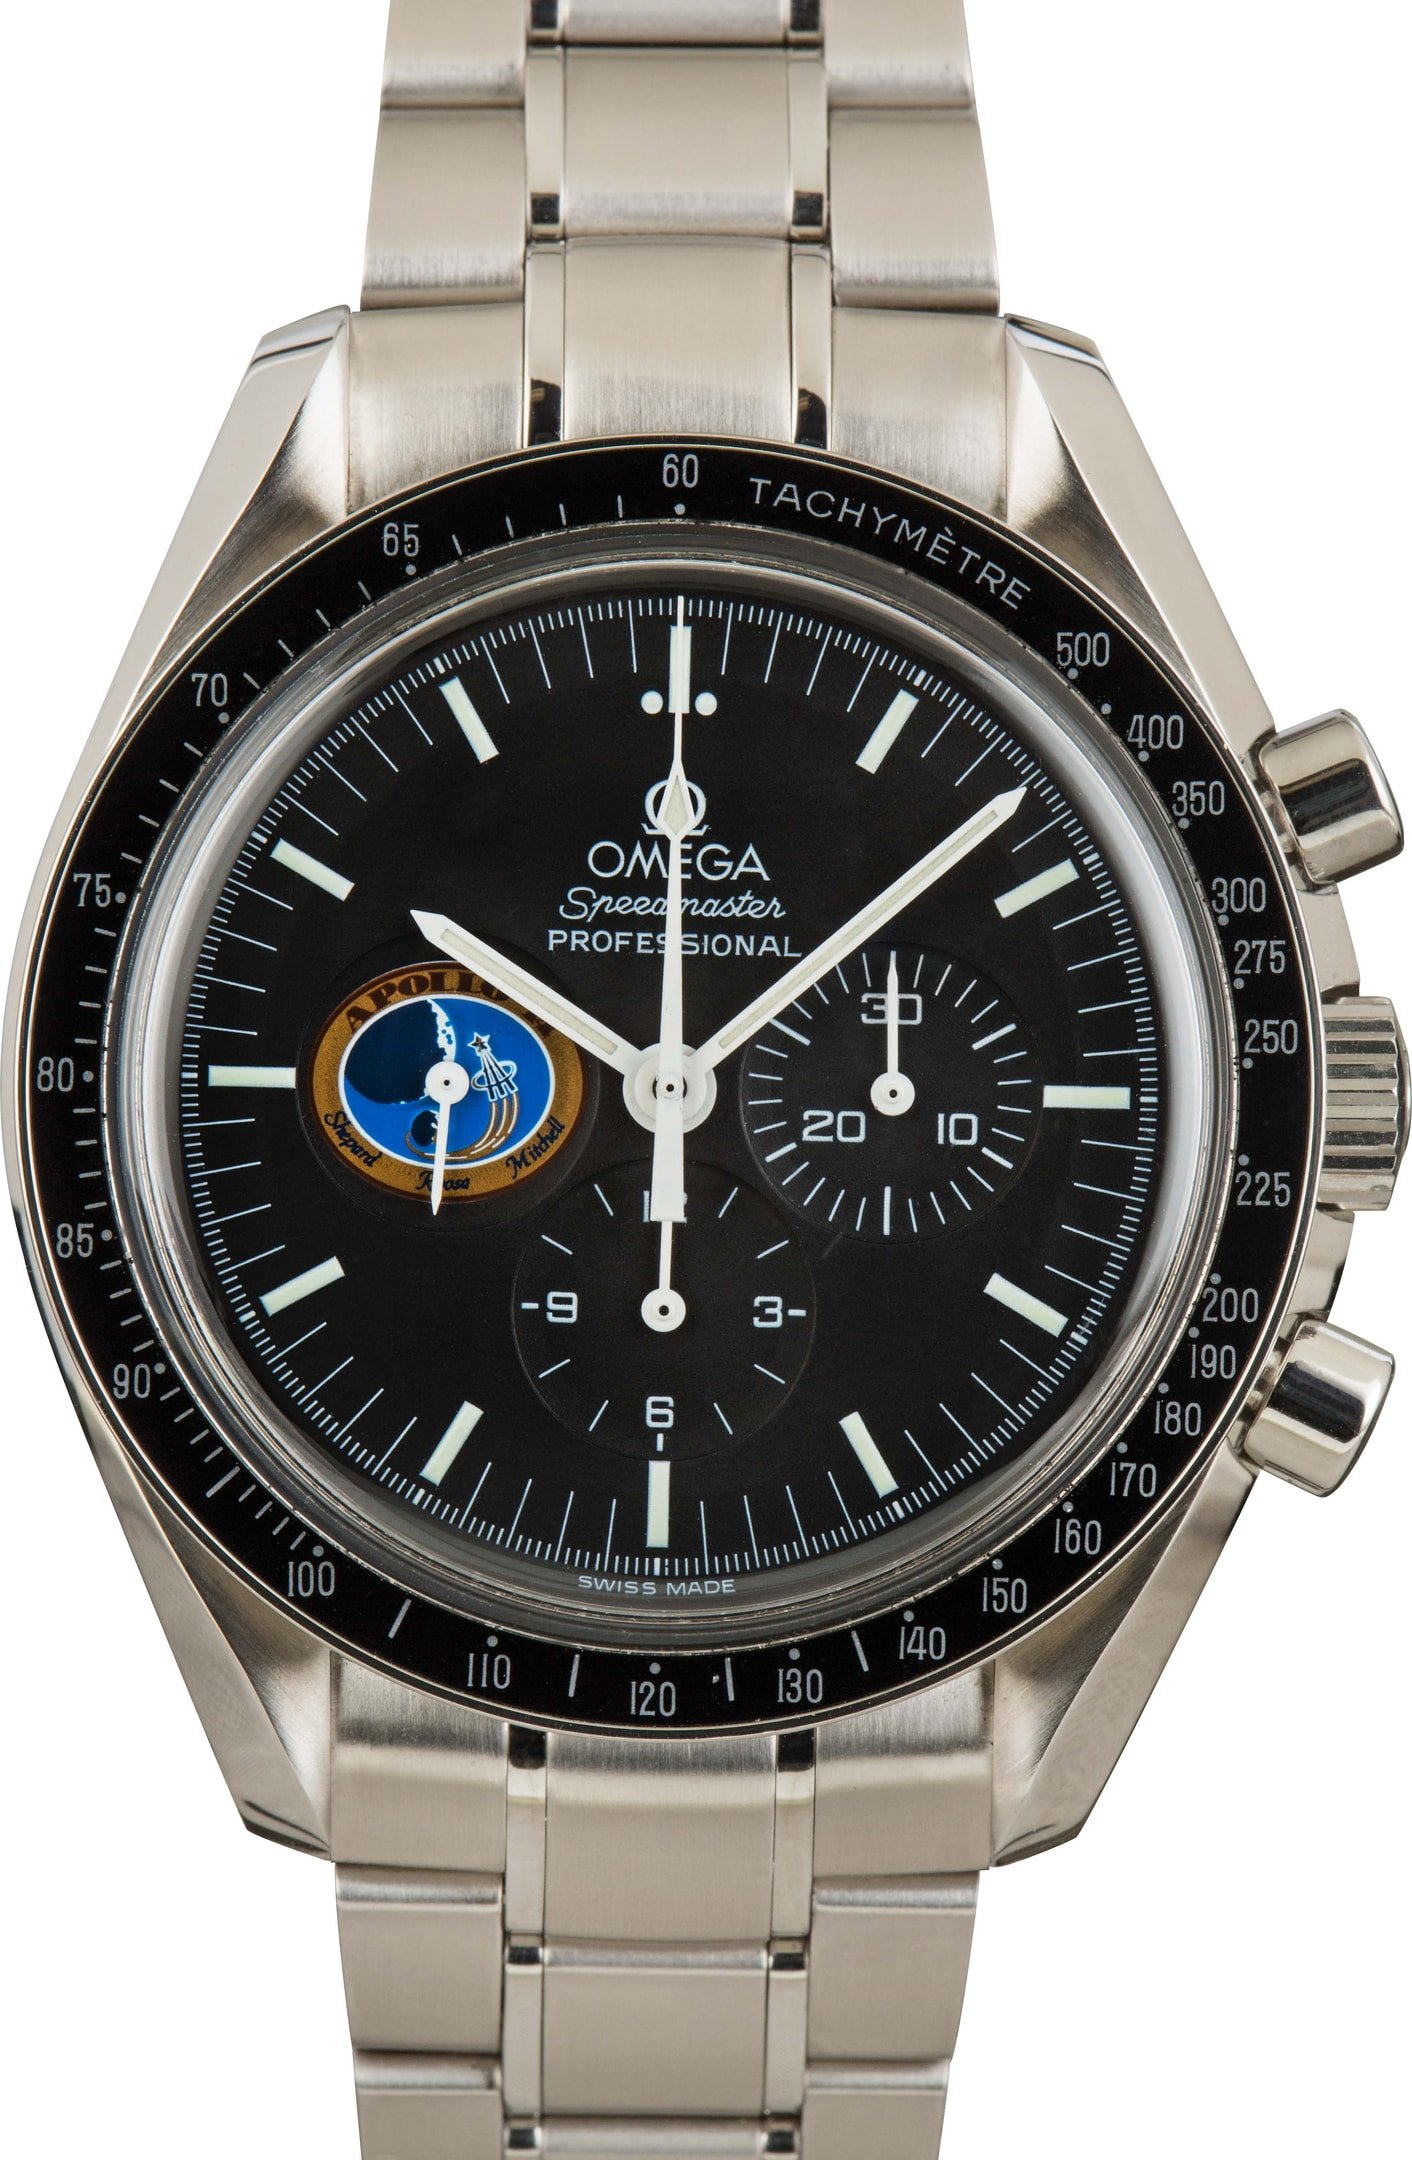 OMEGA Speedmaster: Save up to 60% - BobsWatches.com